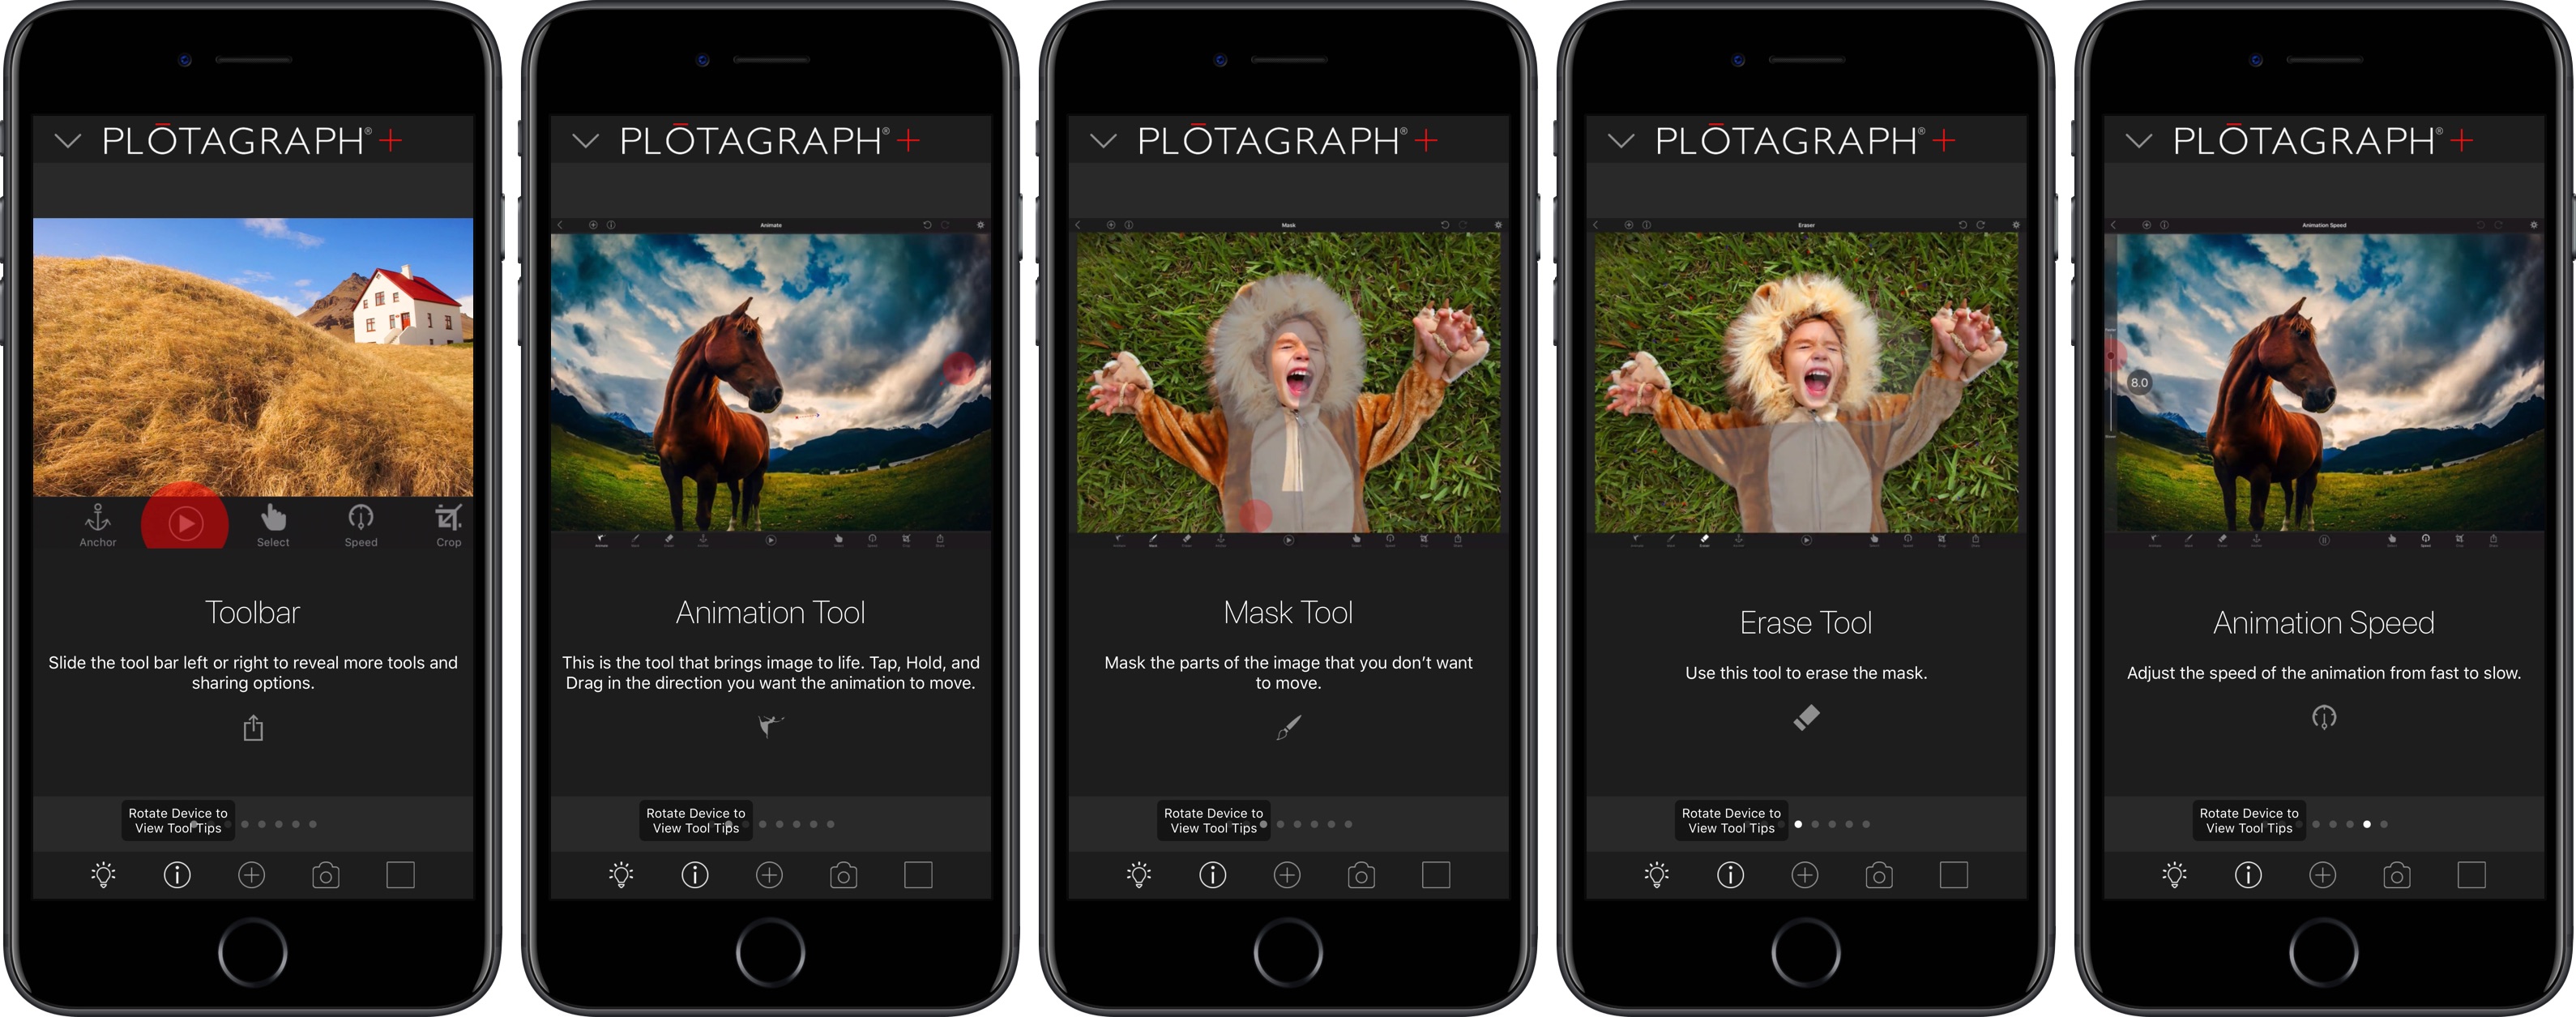 Apple Store app is giving away Plotagraph+ image animation app